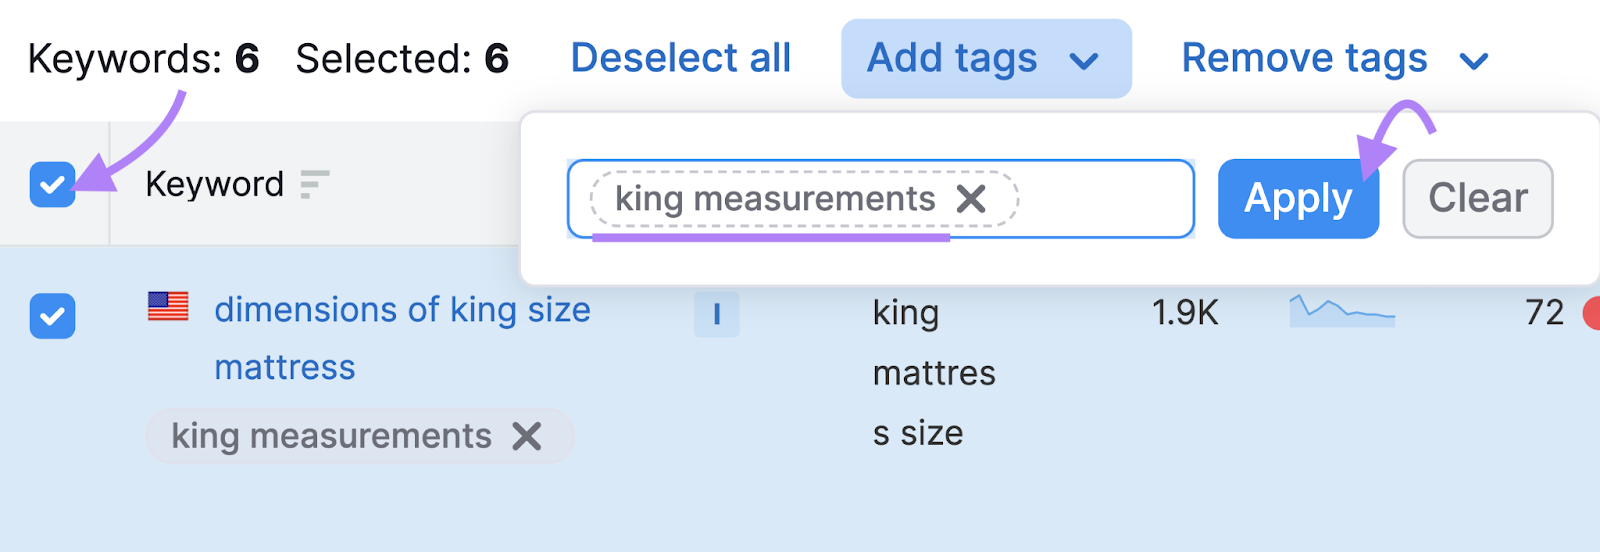 use checkboxes to tag keywords in bulk